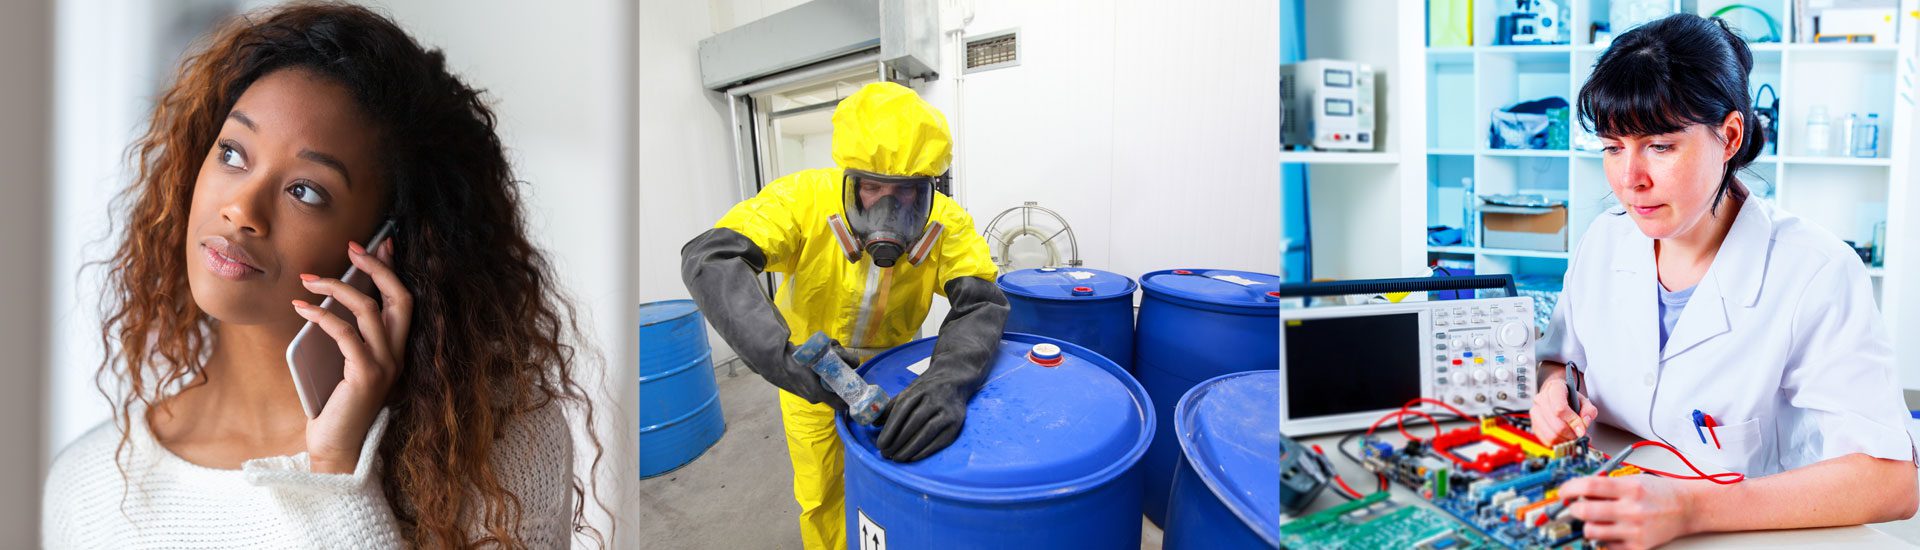 A person in yellow and black suit working on barrels.